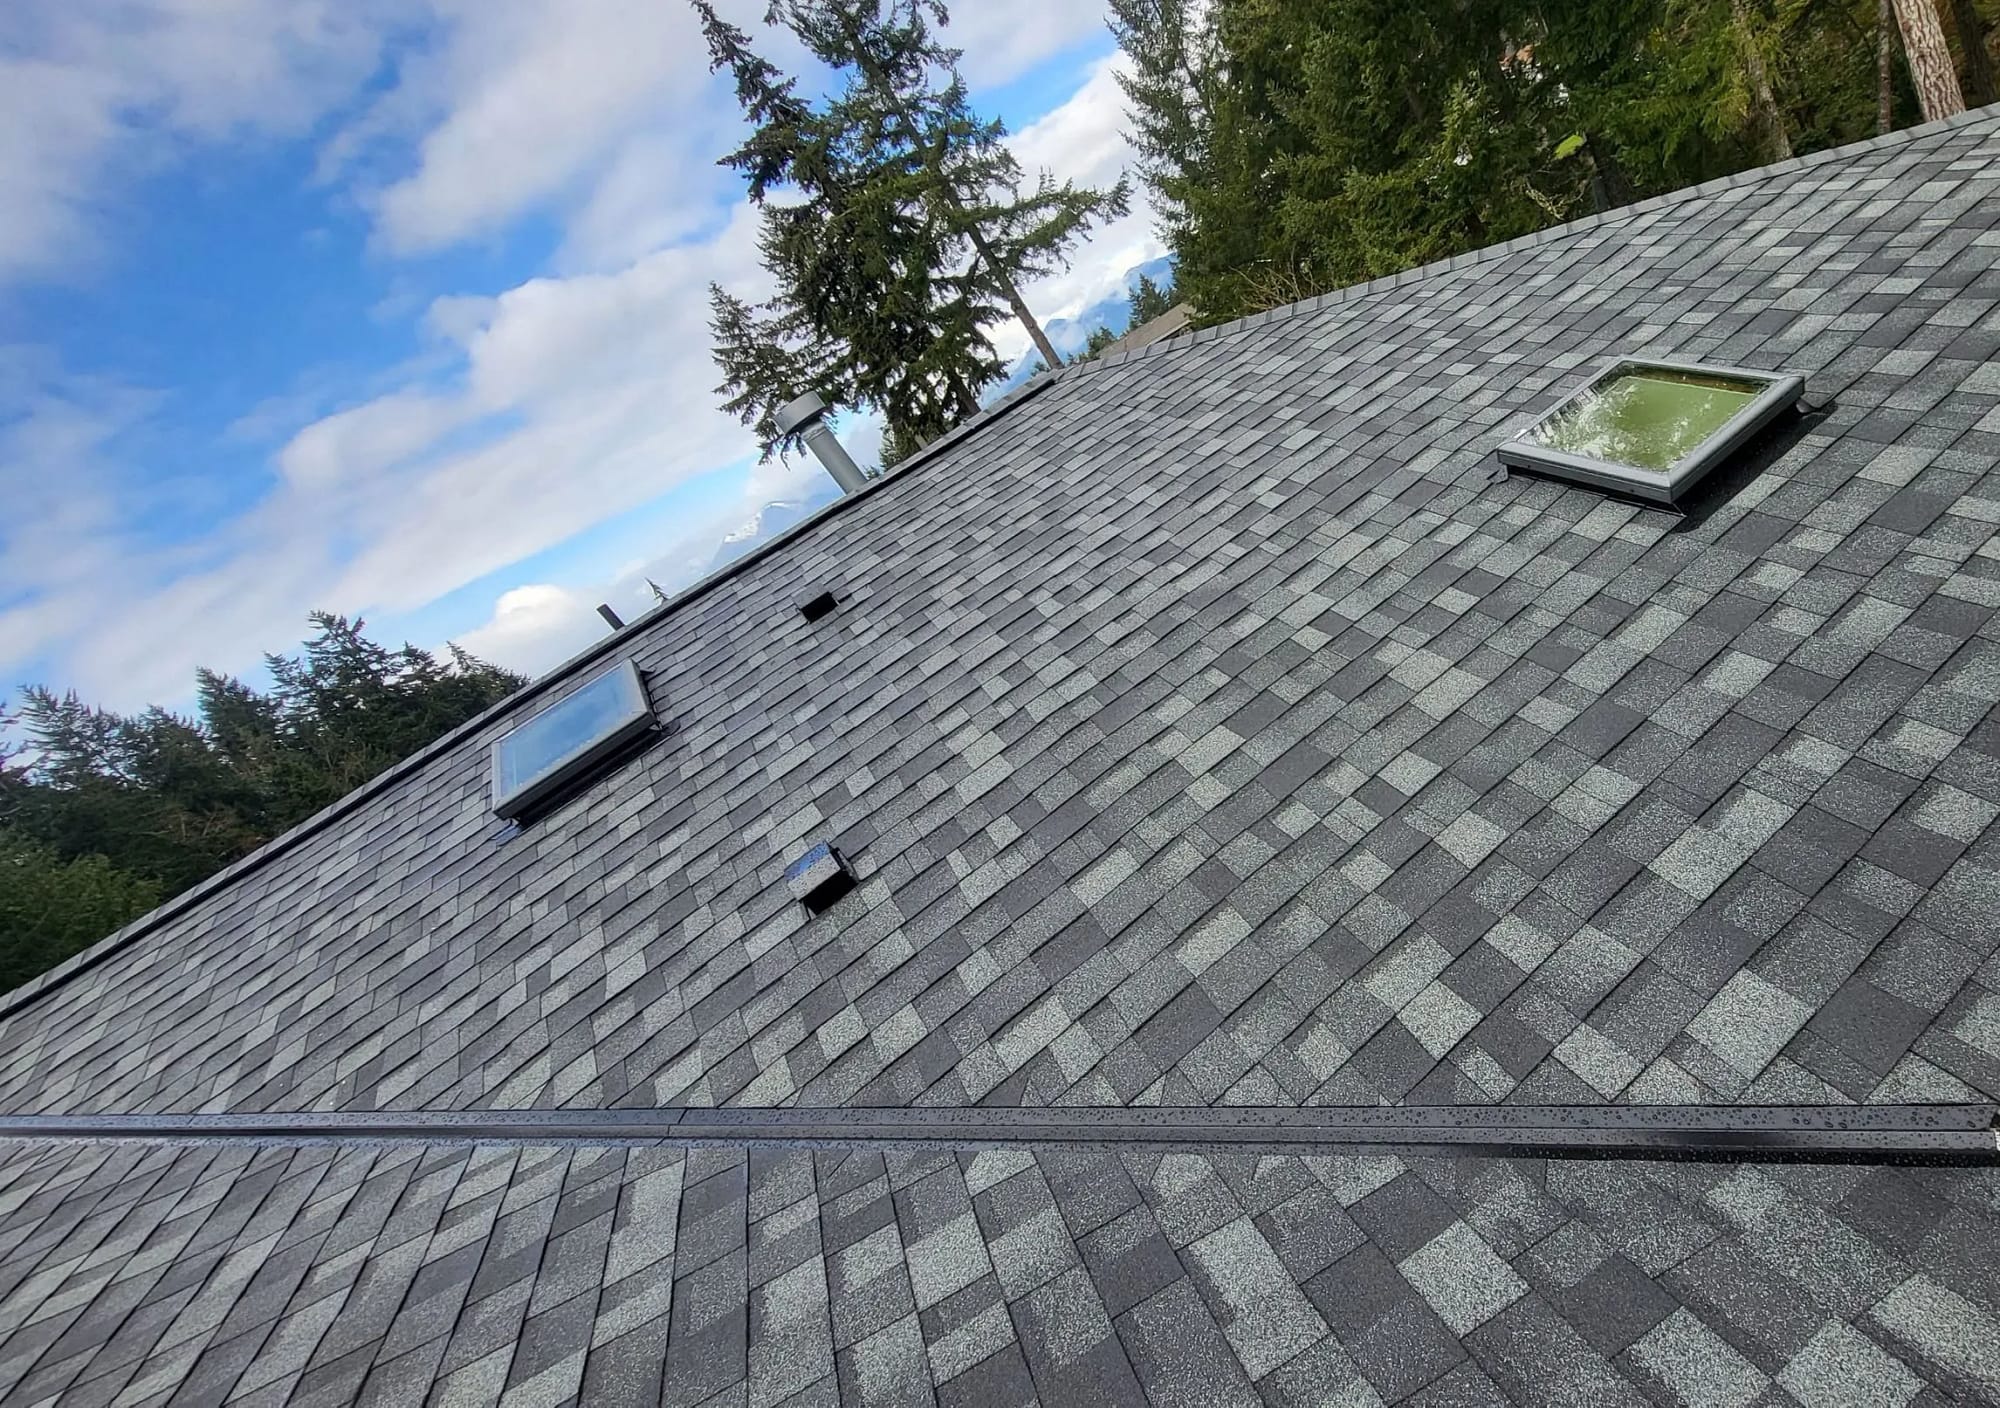 two new skylights on an asphalt shingle roof with pine trees in the background